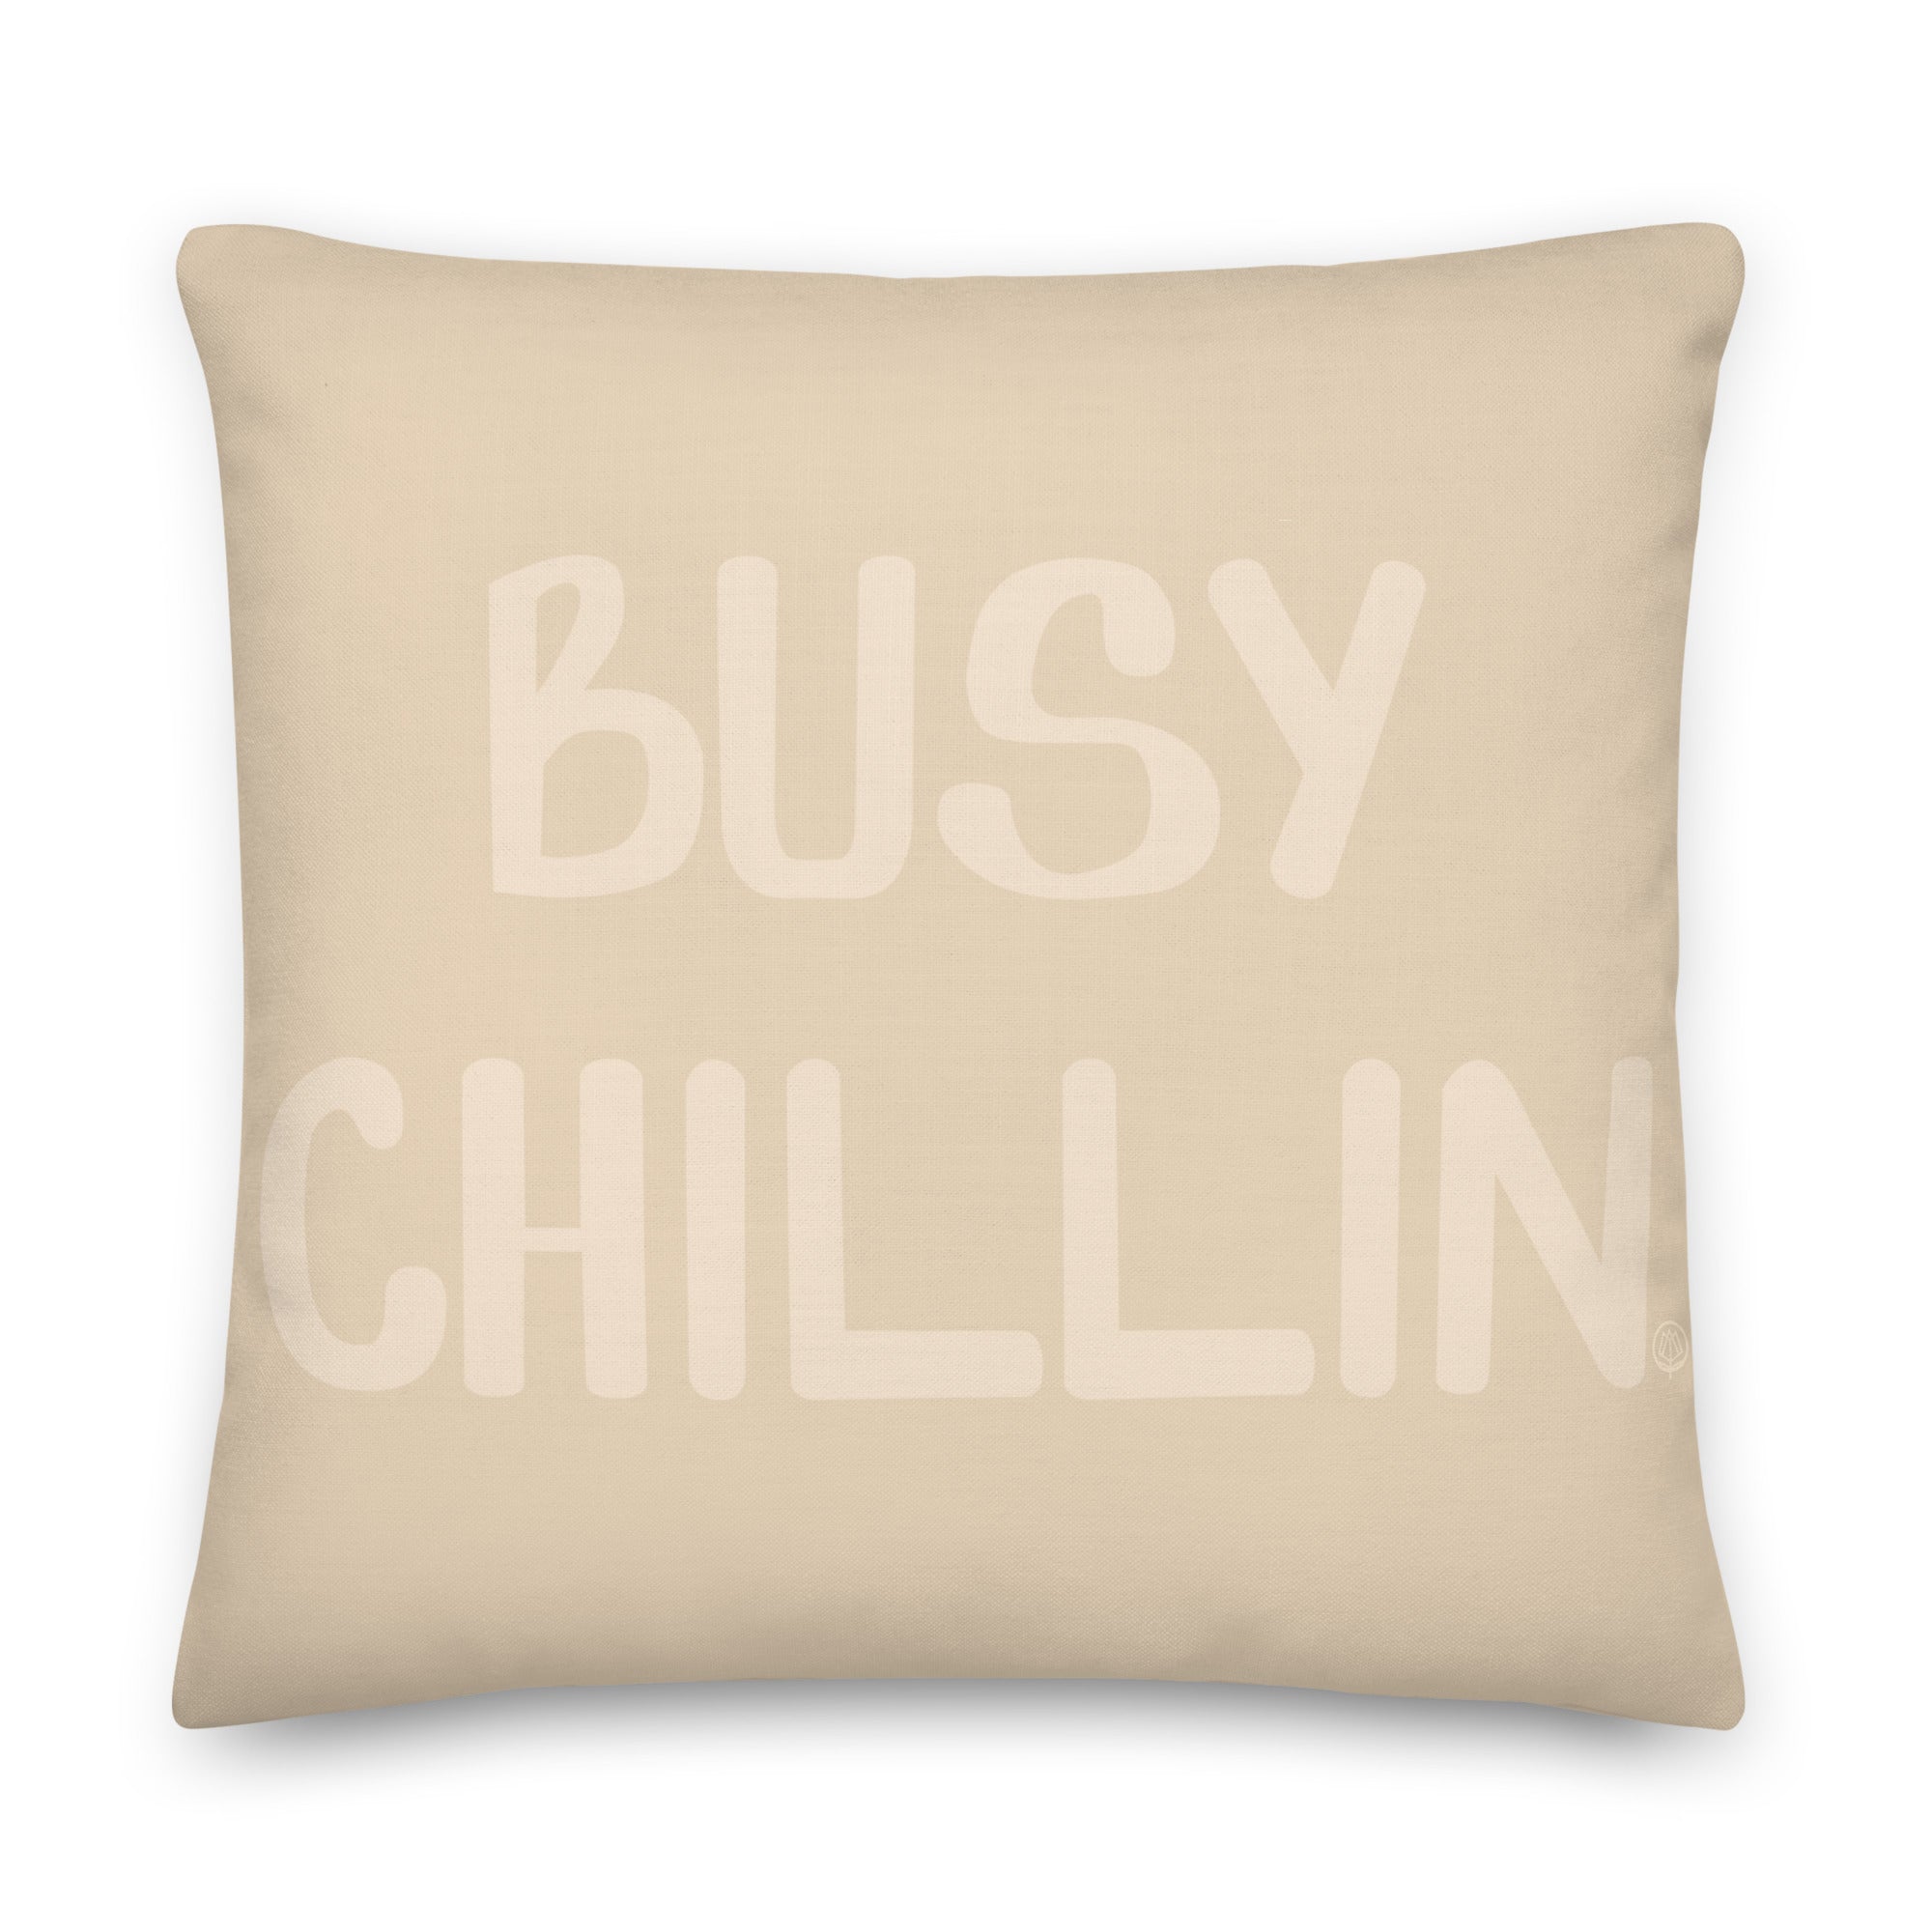 Busy Chillin Pillow - Nude